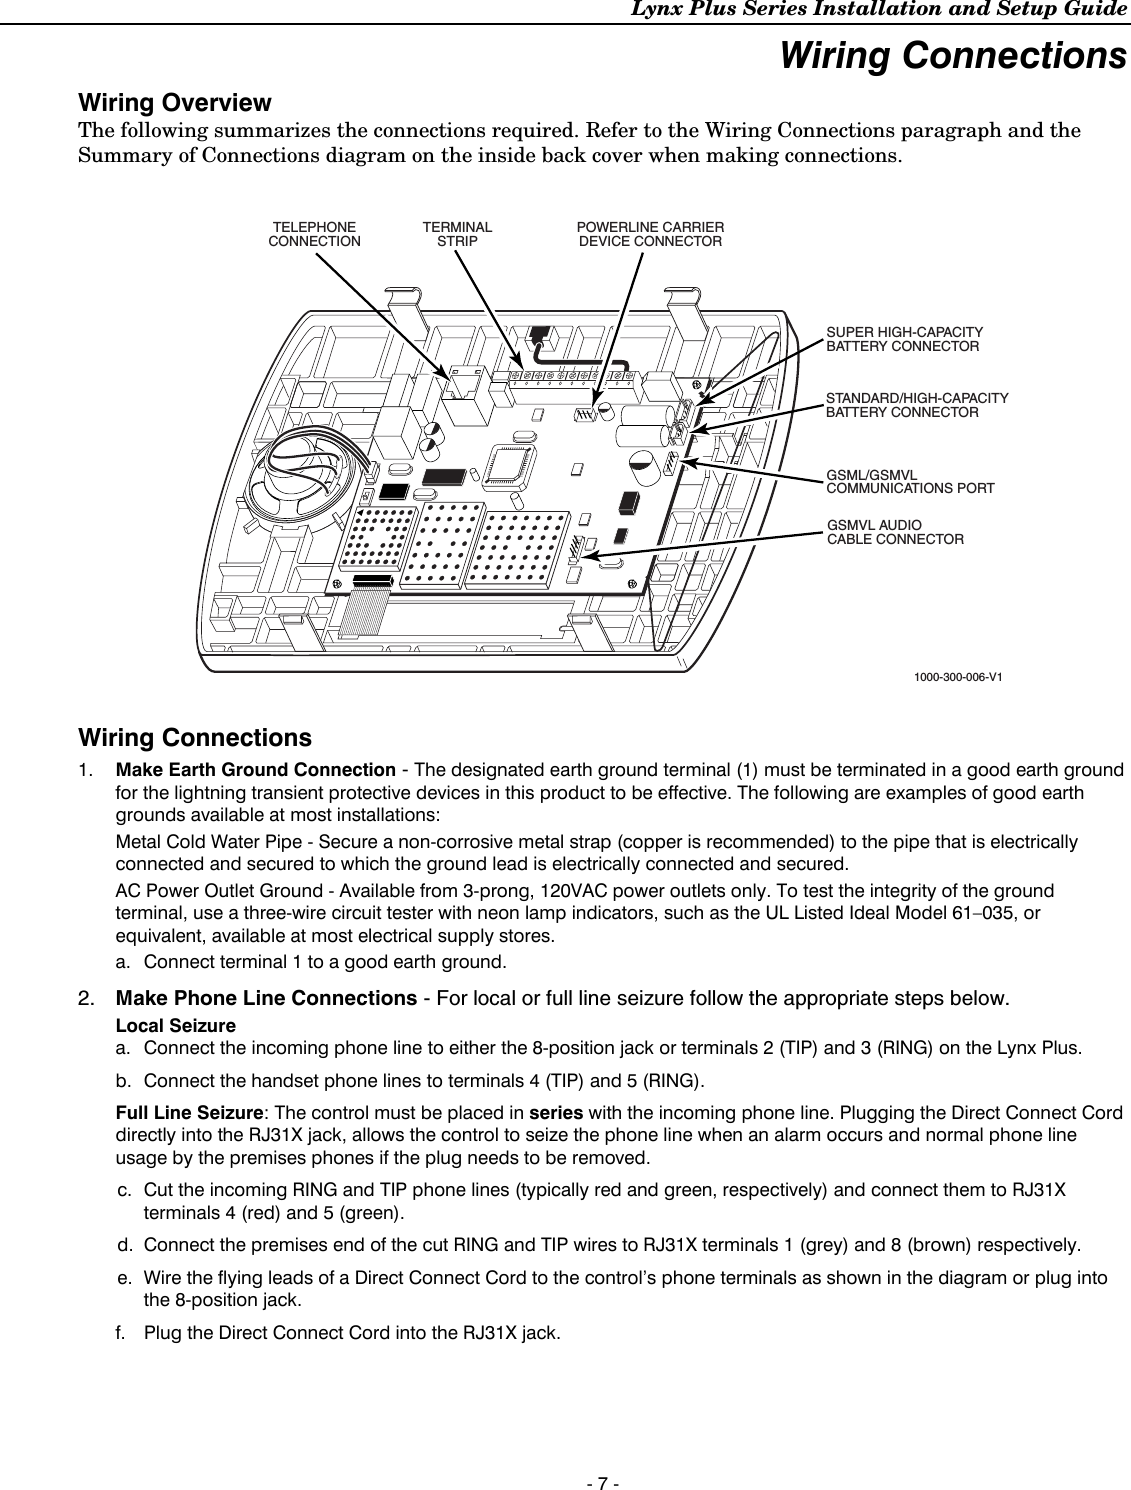 Lynx Plus Series Installation and Setup Guide - 7 - Wiring Connections  Wiring Overview The following summarizes the connections required. Refer to the Wiring Connections paragraph and the Summary of Connections diagram on the inside back cover when making connections.   1000-300-006-V1POWERLINE CARRIERDEVICE CONNECTORSUPER HIGH-CAPACITYBATTERY CONNECTORGSML/GSMVLCOMMUNICATIONS PORTGSMVL AUDIOCABLE CONNECTORSTANDARD/HIGH-CAPACITYBATTERY CONNECTORTERMINALSTRIPTELEPHONECONNECTION  Wiring Connections  1.  Make Earth Ground Connection - The designated earth ground terminal (1) must be terminated in a good earth ground for the lightning transient protective devices in this product to be effective. The following are examples of good earth grounds available at most installations: Metal Cold Water Pipe - Secure a non-corrosive metal strap (copper is recommended) to the pipe that is electrically connected and secured to which the ground lead is electrically connected and secured. AC Power Outlet Ground - Available from 3-prong, 120VAC power outlets only. To test the integrity of the ground terminal, use a three-wire circuit tester with neon lamp indicators, such as the UL Listed Ideal Model 61–035, or equivalent, available at most electrical supply stores. a.  Connect terminal 1 to a good earth ground. 2.  Make Phone Line Connections - For local or full line seizure follow the appropriate steps below. Local Seizure a.  Connect the incoming phone line to either the 8-position jack or terminals 2 (TIP) and 3 (RING) on the Lynx Plus. b.  Connect the handset phone lines to terminals 4 (TIP) and 5 (RING). Full Line Seizure: The control must be placed in series with the incoming phone line. Plugging the Direct Connect Cord directly into the RJ31X jack, allows the control to seize the phone line when an alarm occurs and normal phone line usage by the premises phones if the plug needs to be removed. c.  Cut the incoming RING and TIP phone lines (typically red and green, respectively) and connect them to RJ31X terminals 4 (red) and 5 (green). d.  Connect the premises end of the cut RING and TIP wires to RJ31X terminals 1 (grey) and 8 (brown) respectively. e.  Wire the flying leads of a Direct Connect Cord to the control’s phone terminals as shown in the diagram or plug into the 8-position jack.  f.  Plug the Direct Connect Cord into the RJ31X jack. 